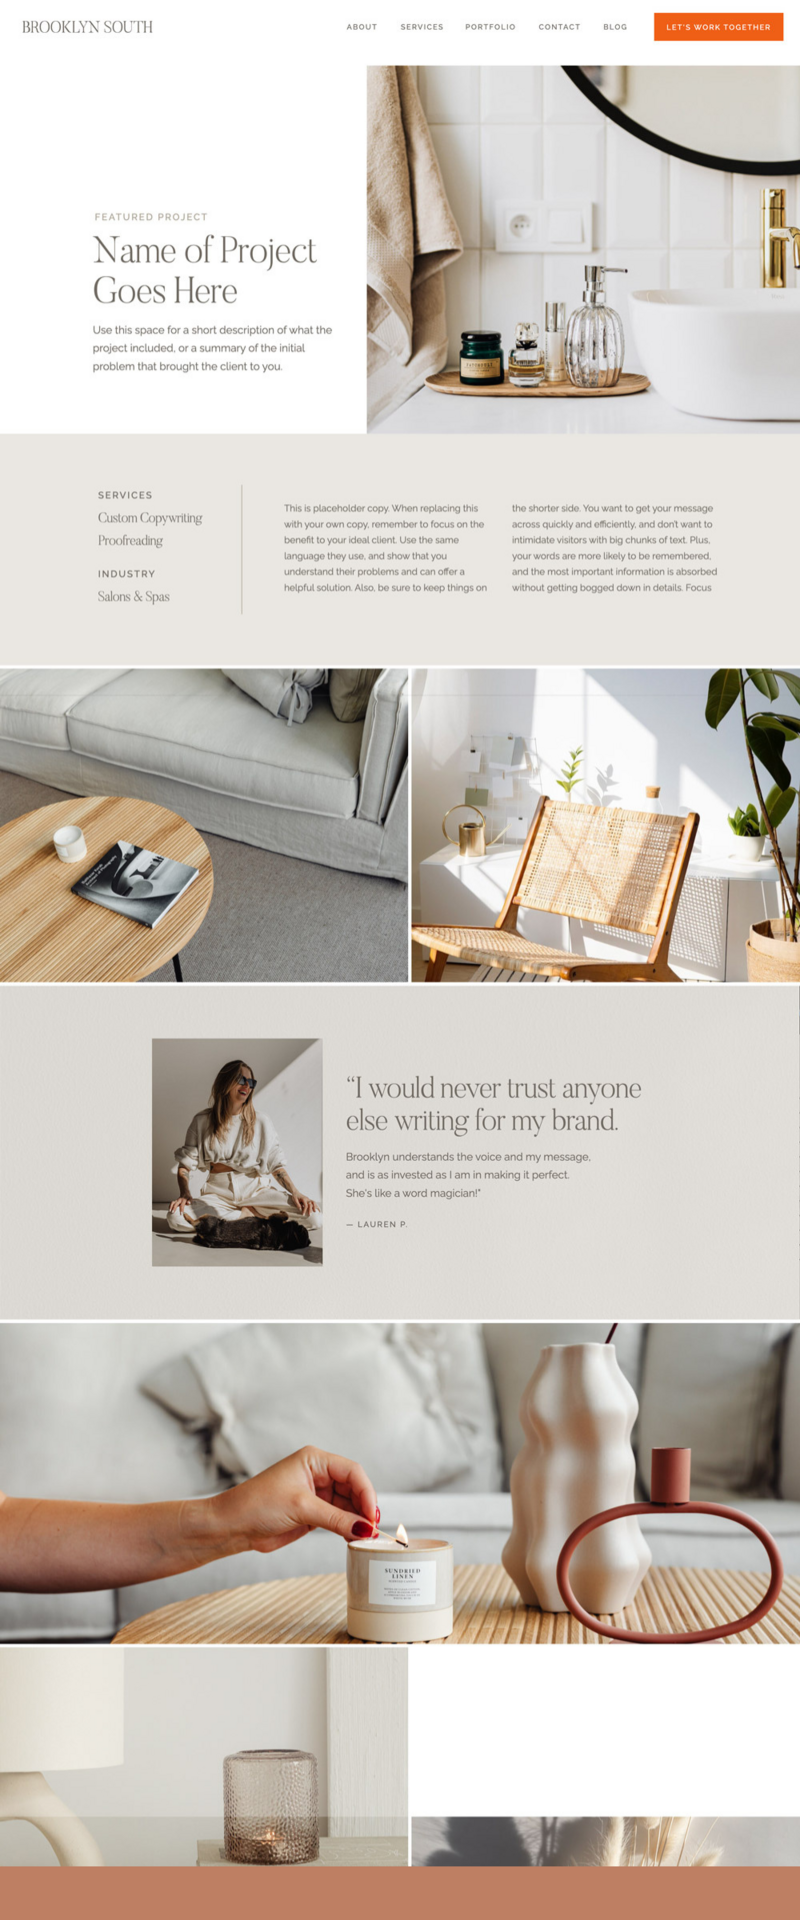 showit_template_for_creative_service_providers_-_brooklyn_south_5